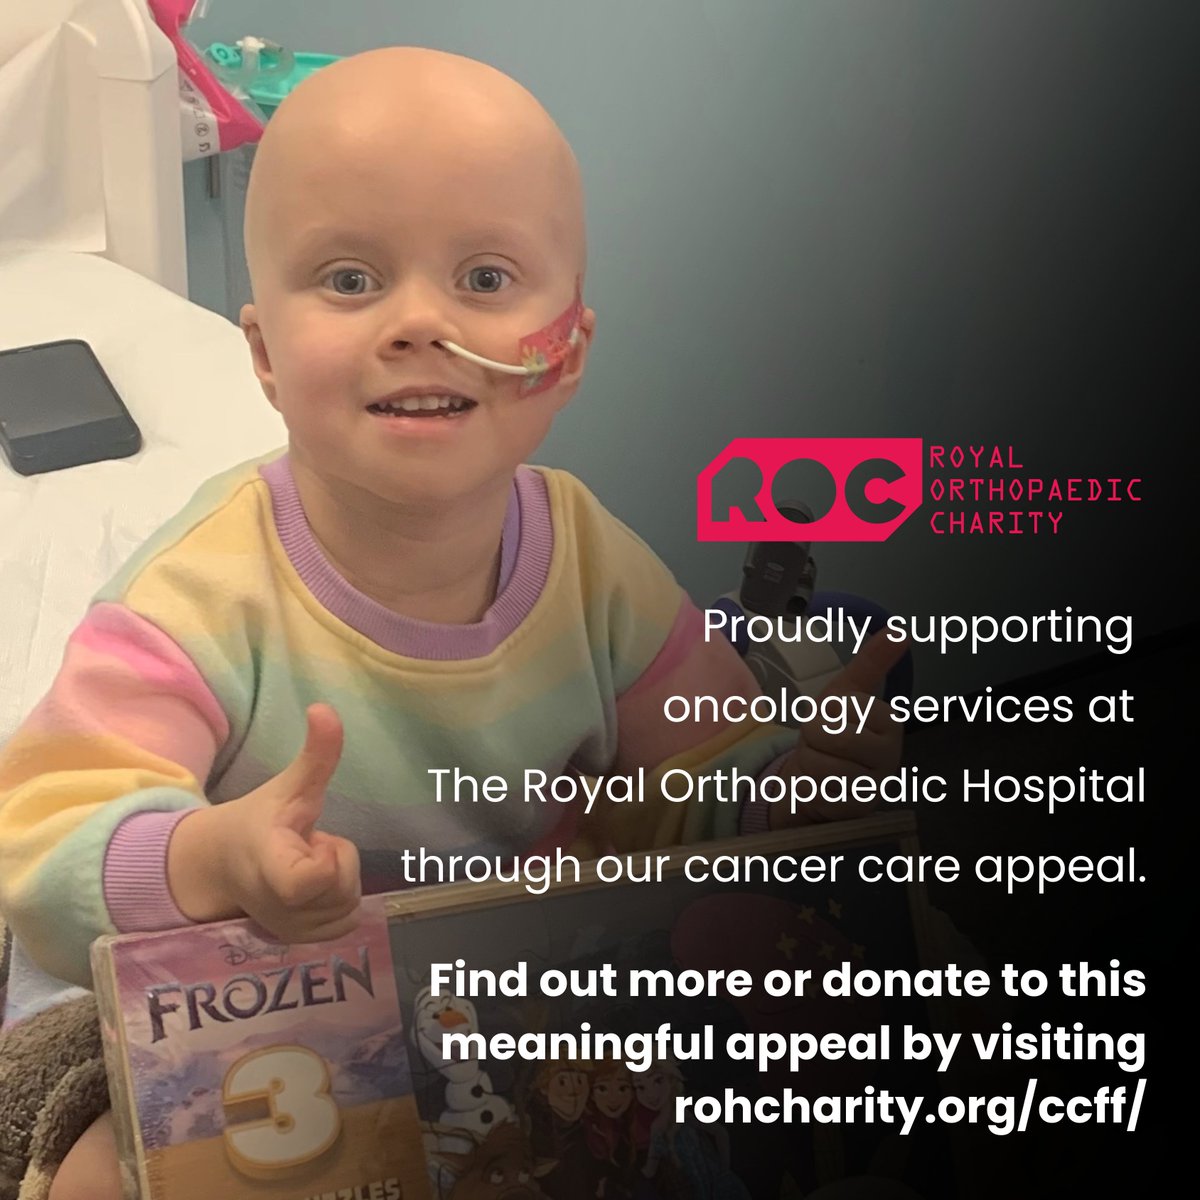 So far this financial year we have provided over £100,000 worth of support for oncology patients at @ROHNHSFT . As part of #WorldCancerDay we will be sharing some of the ways these funds have made an impact. Follow along today to find out the impact we've made! #NHSCharity